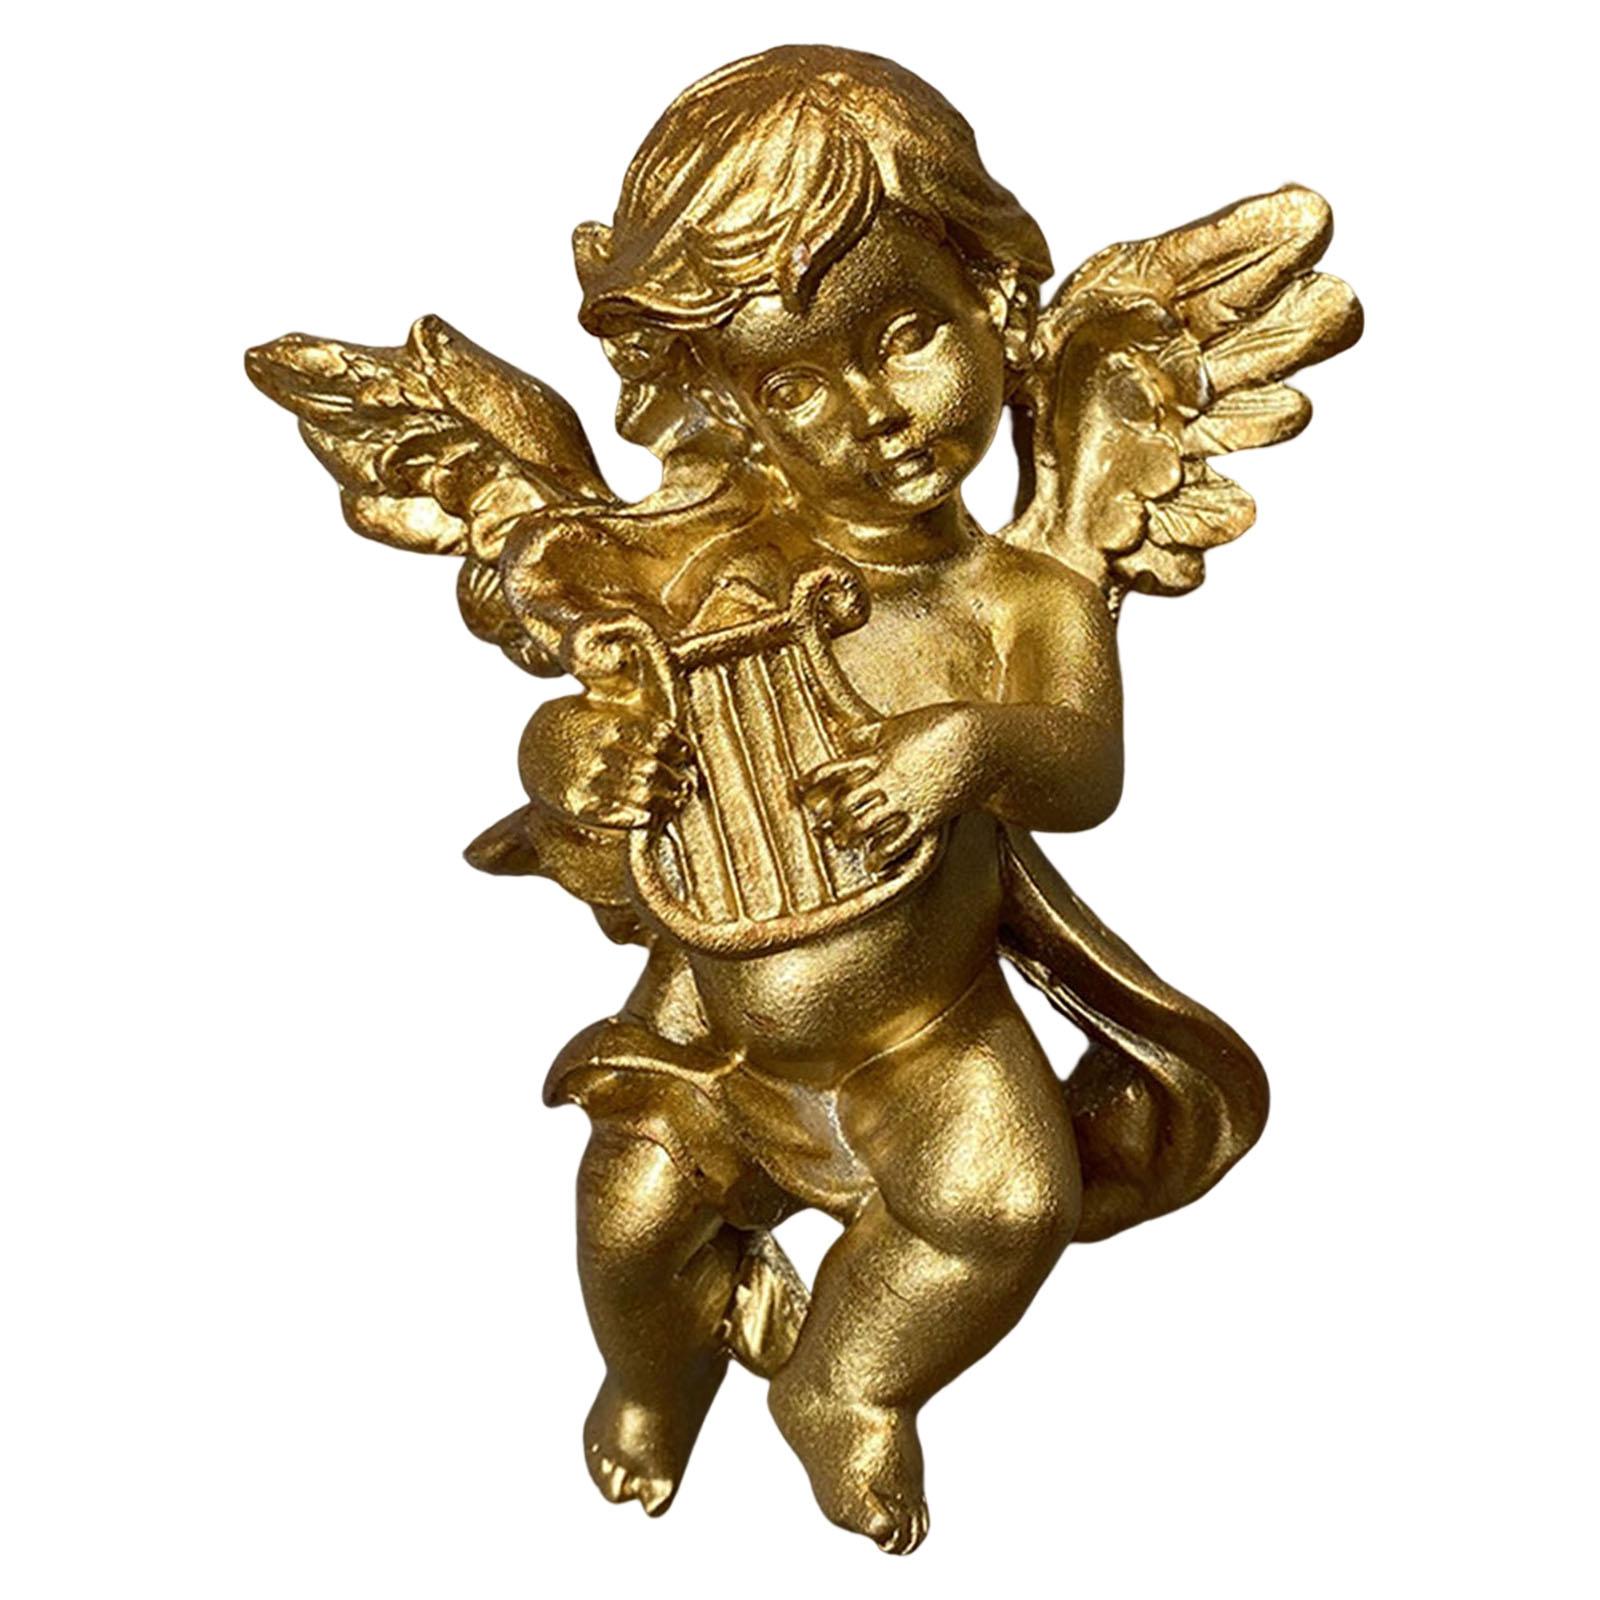 Angel Statue Cherub Wall Sculpture Collectible for Home Bar Decor StyleC